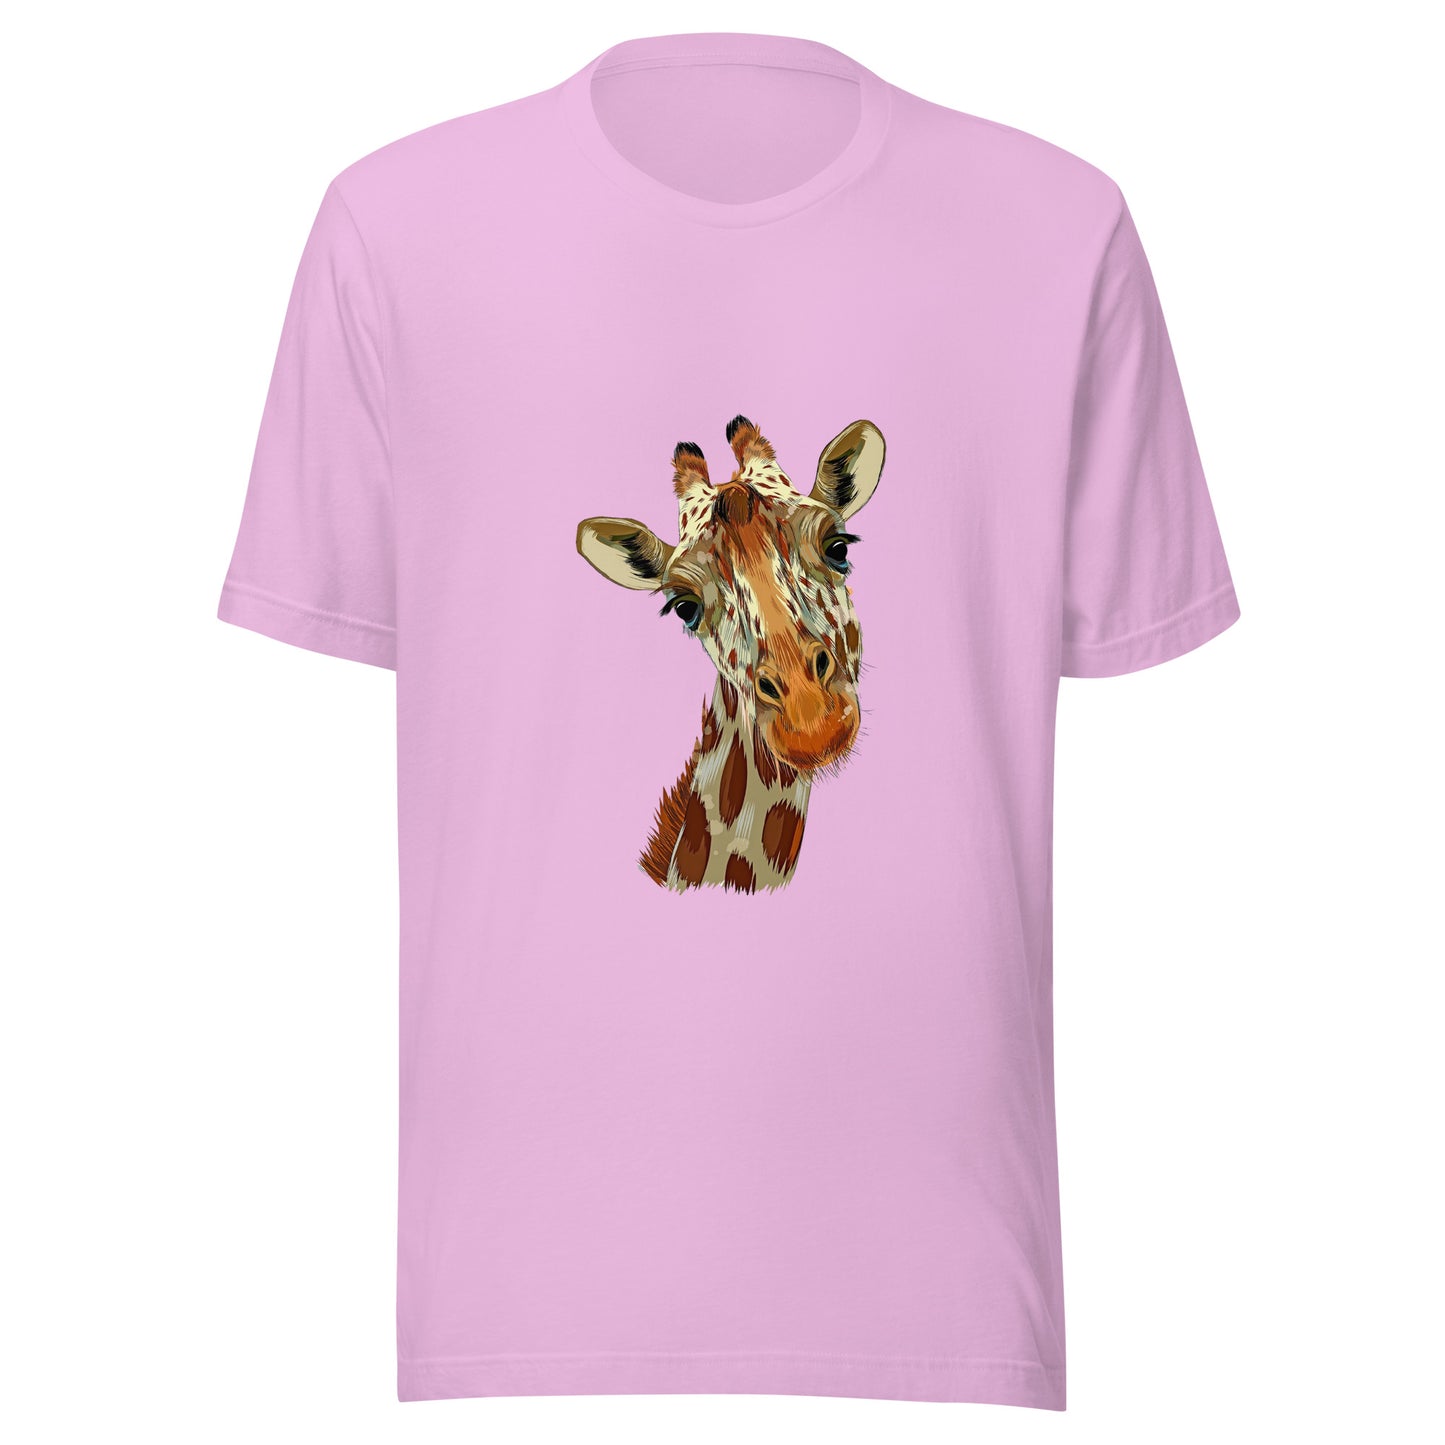 Unisex T-Shirt printed with a Quizzical Giraffe